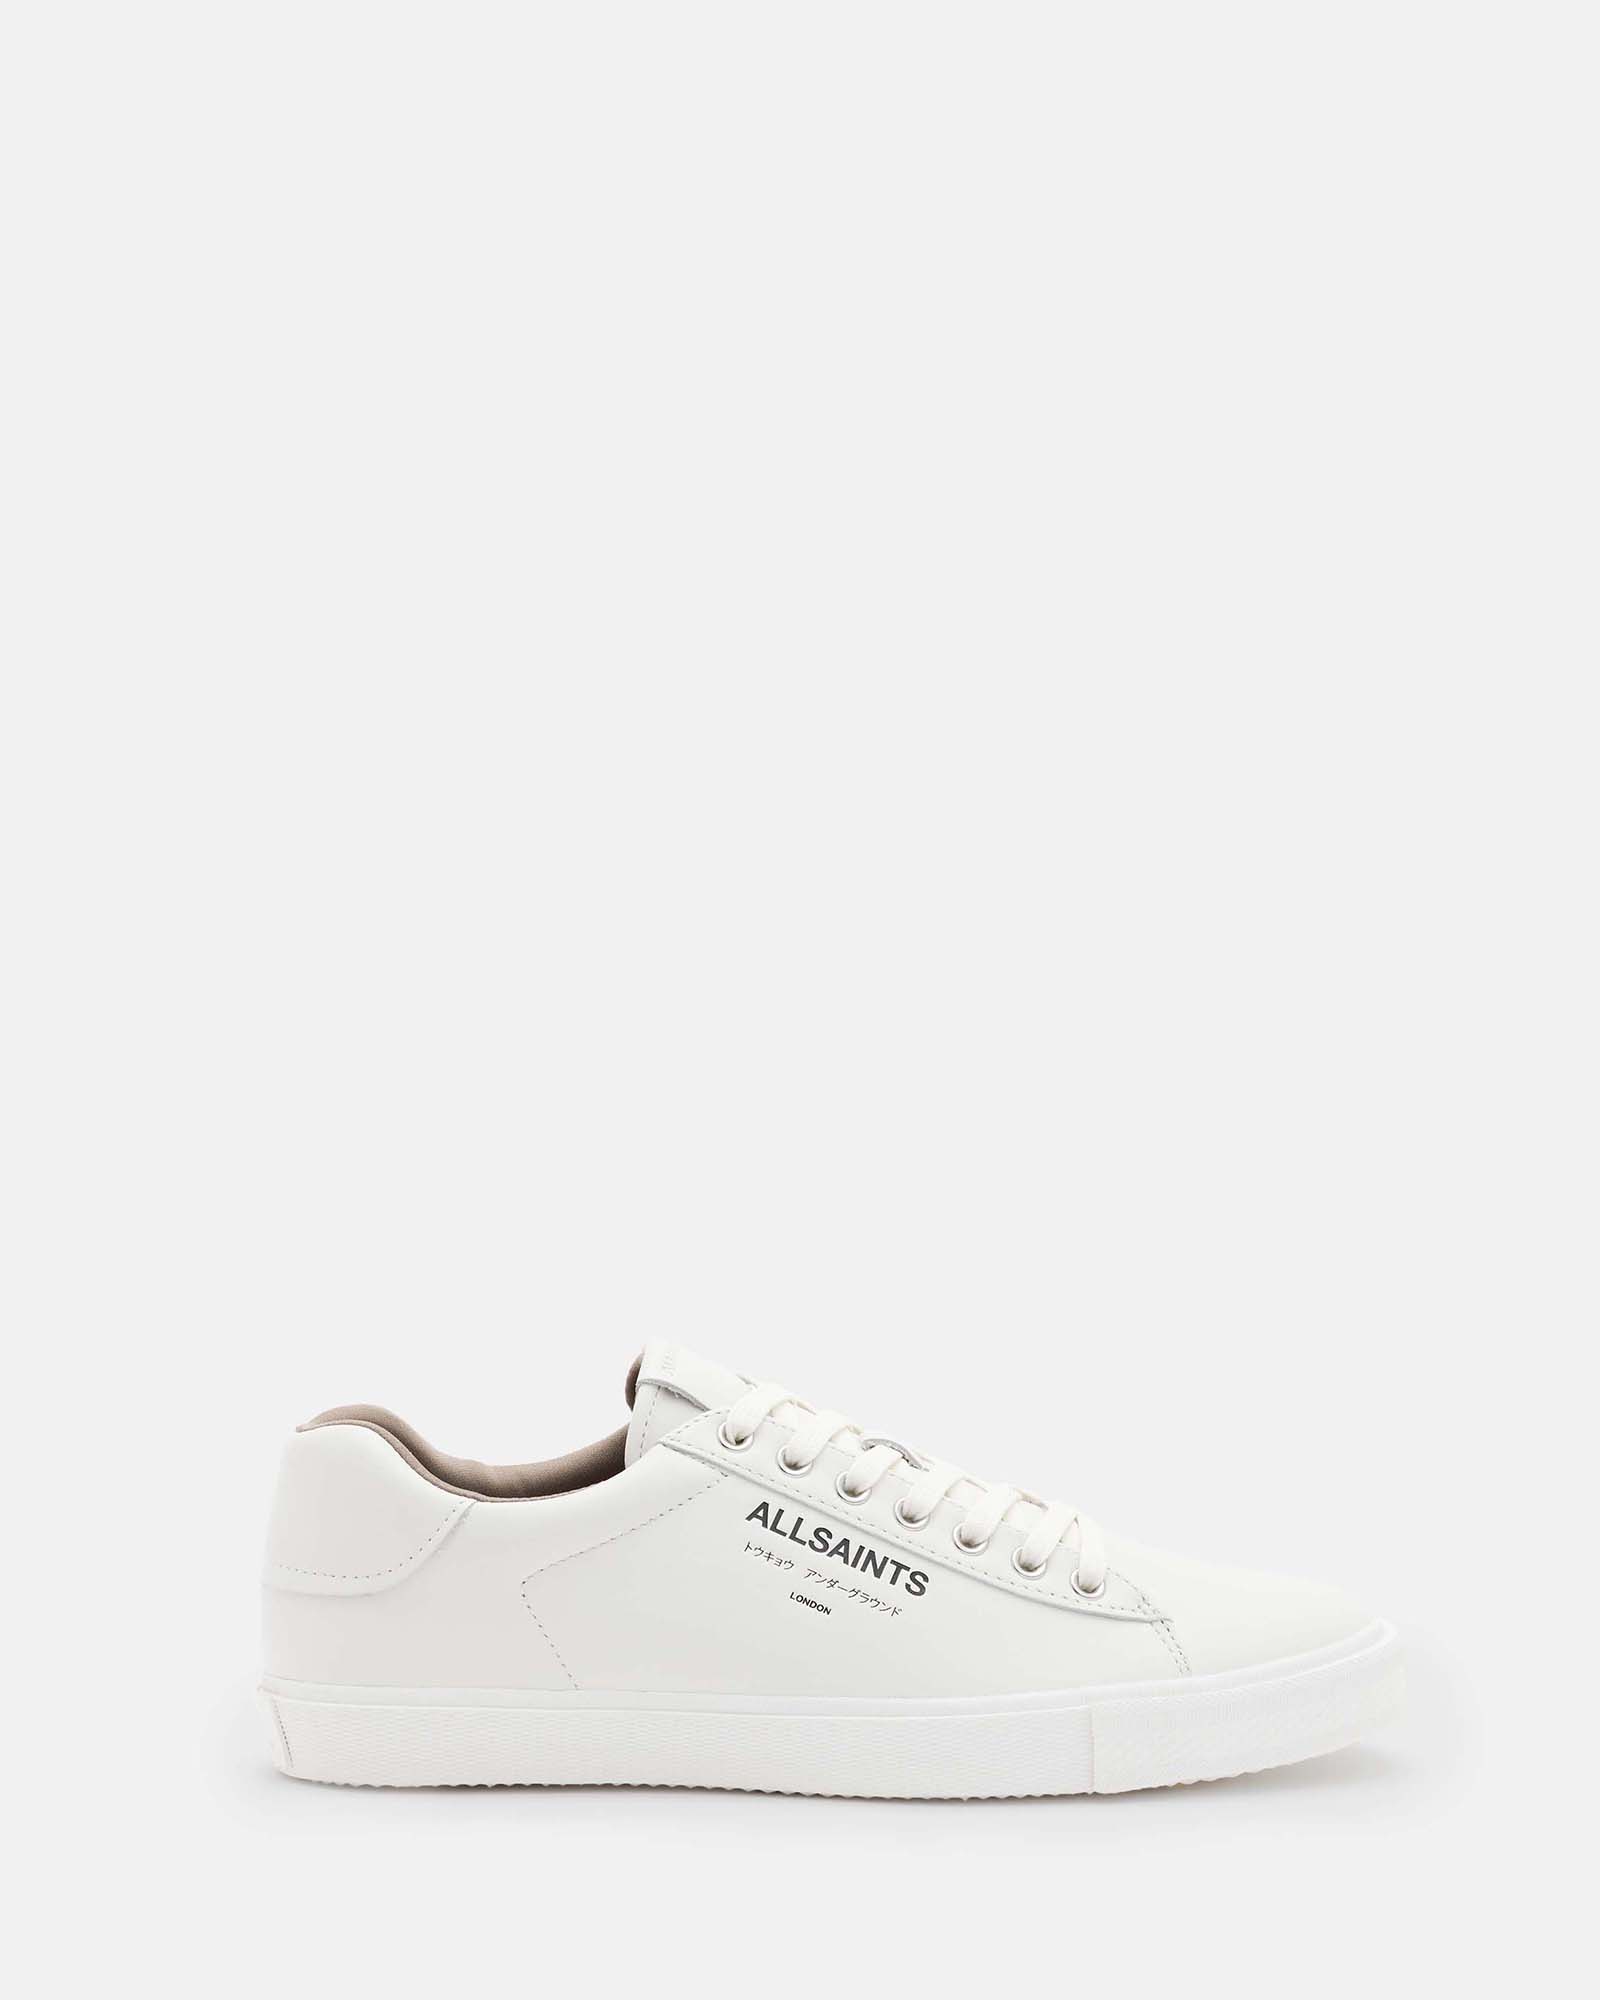 AllSaints Underground Leather Low Top Trainers,, TRIPLE WHITE